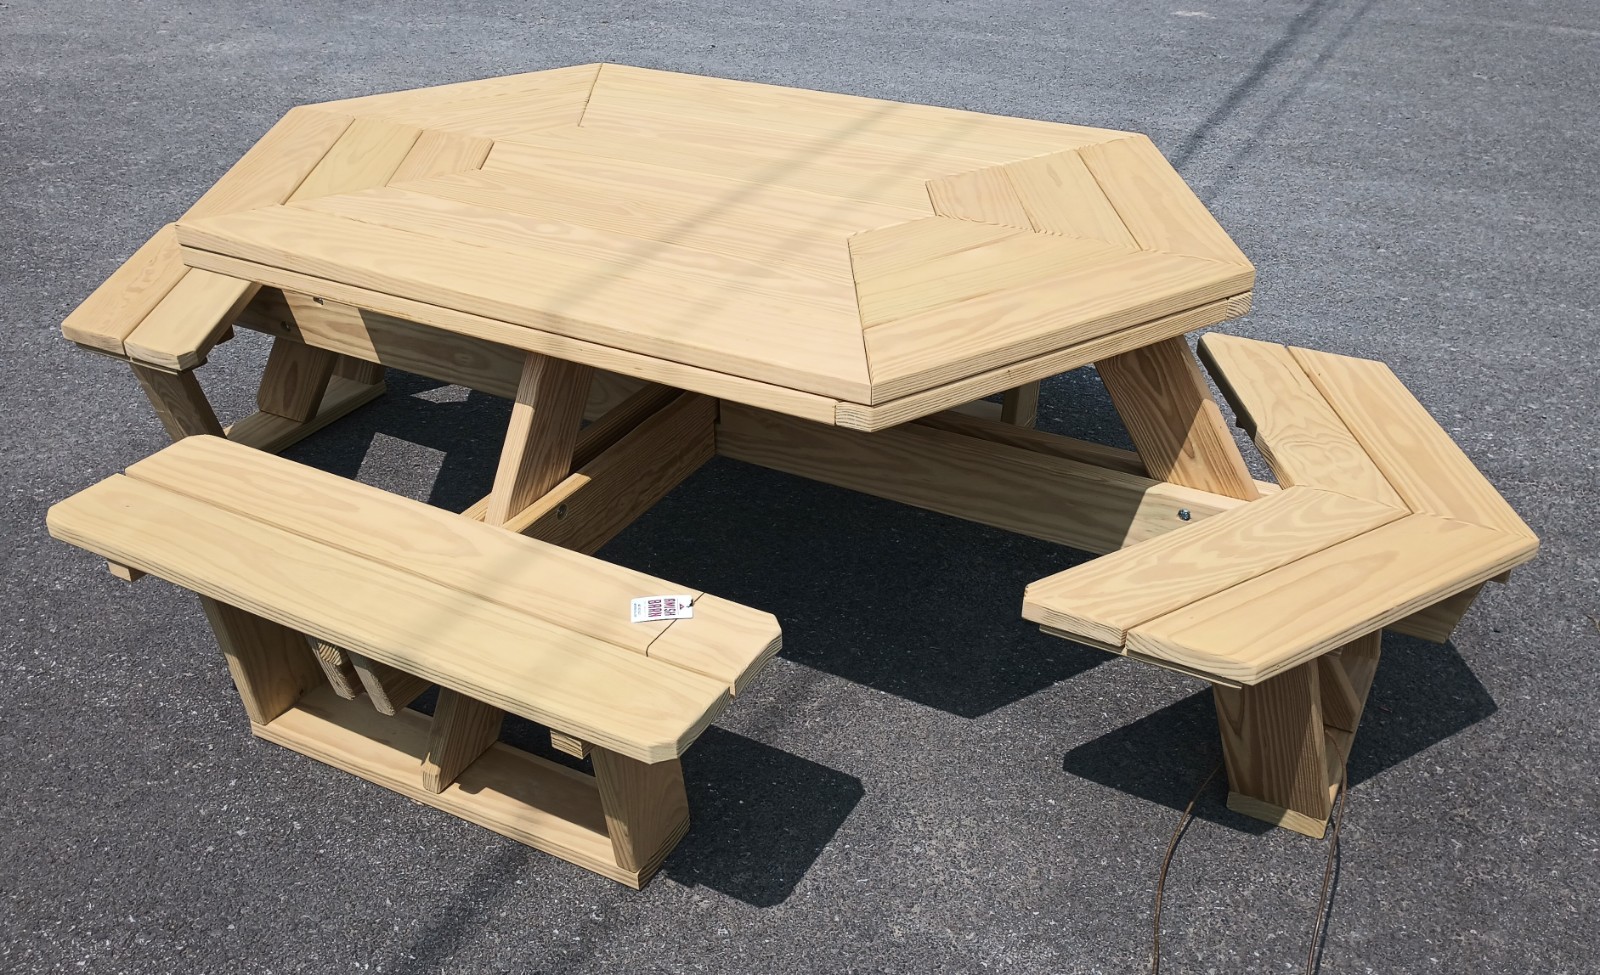 Hexagon Wooden Table with Attached Benches